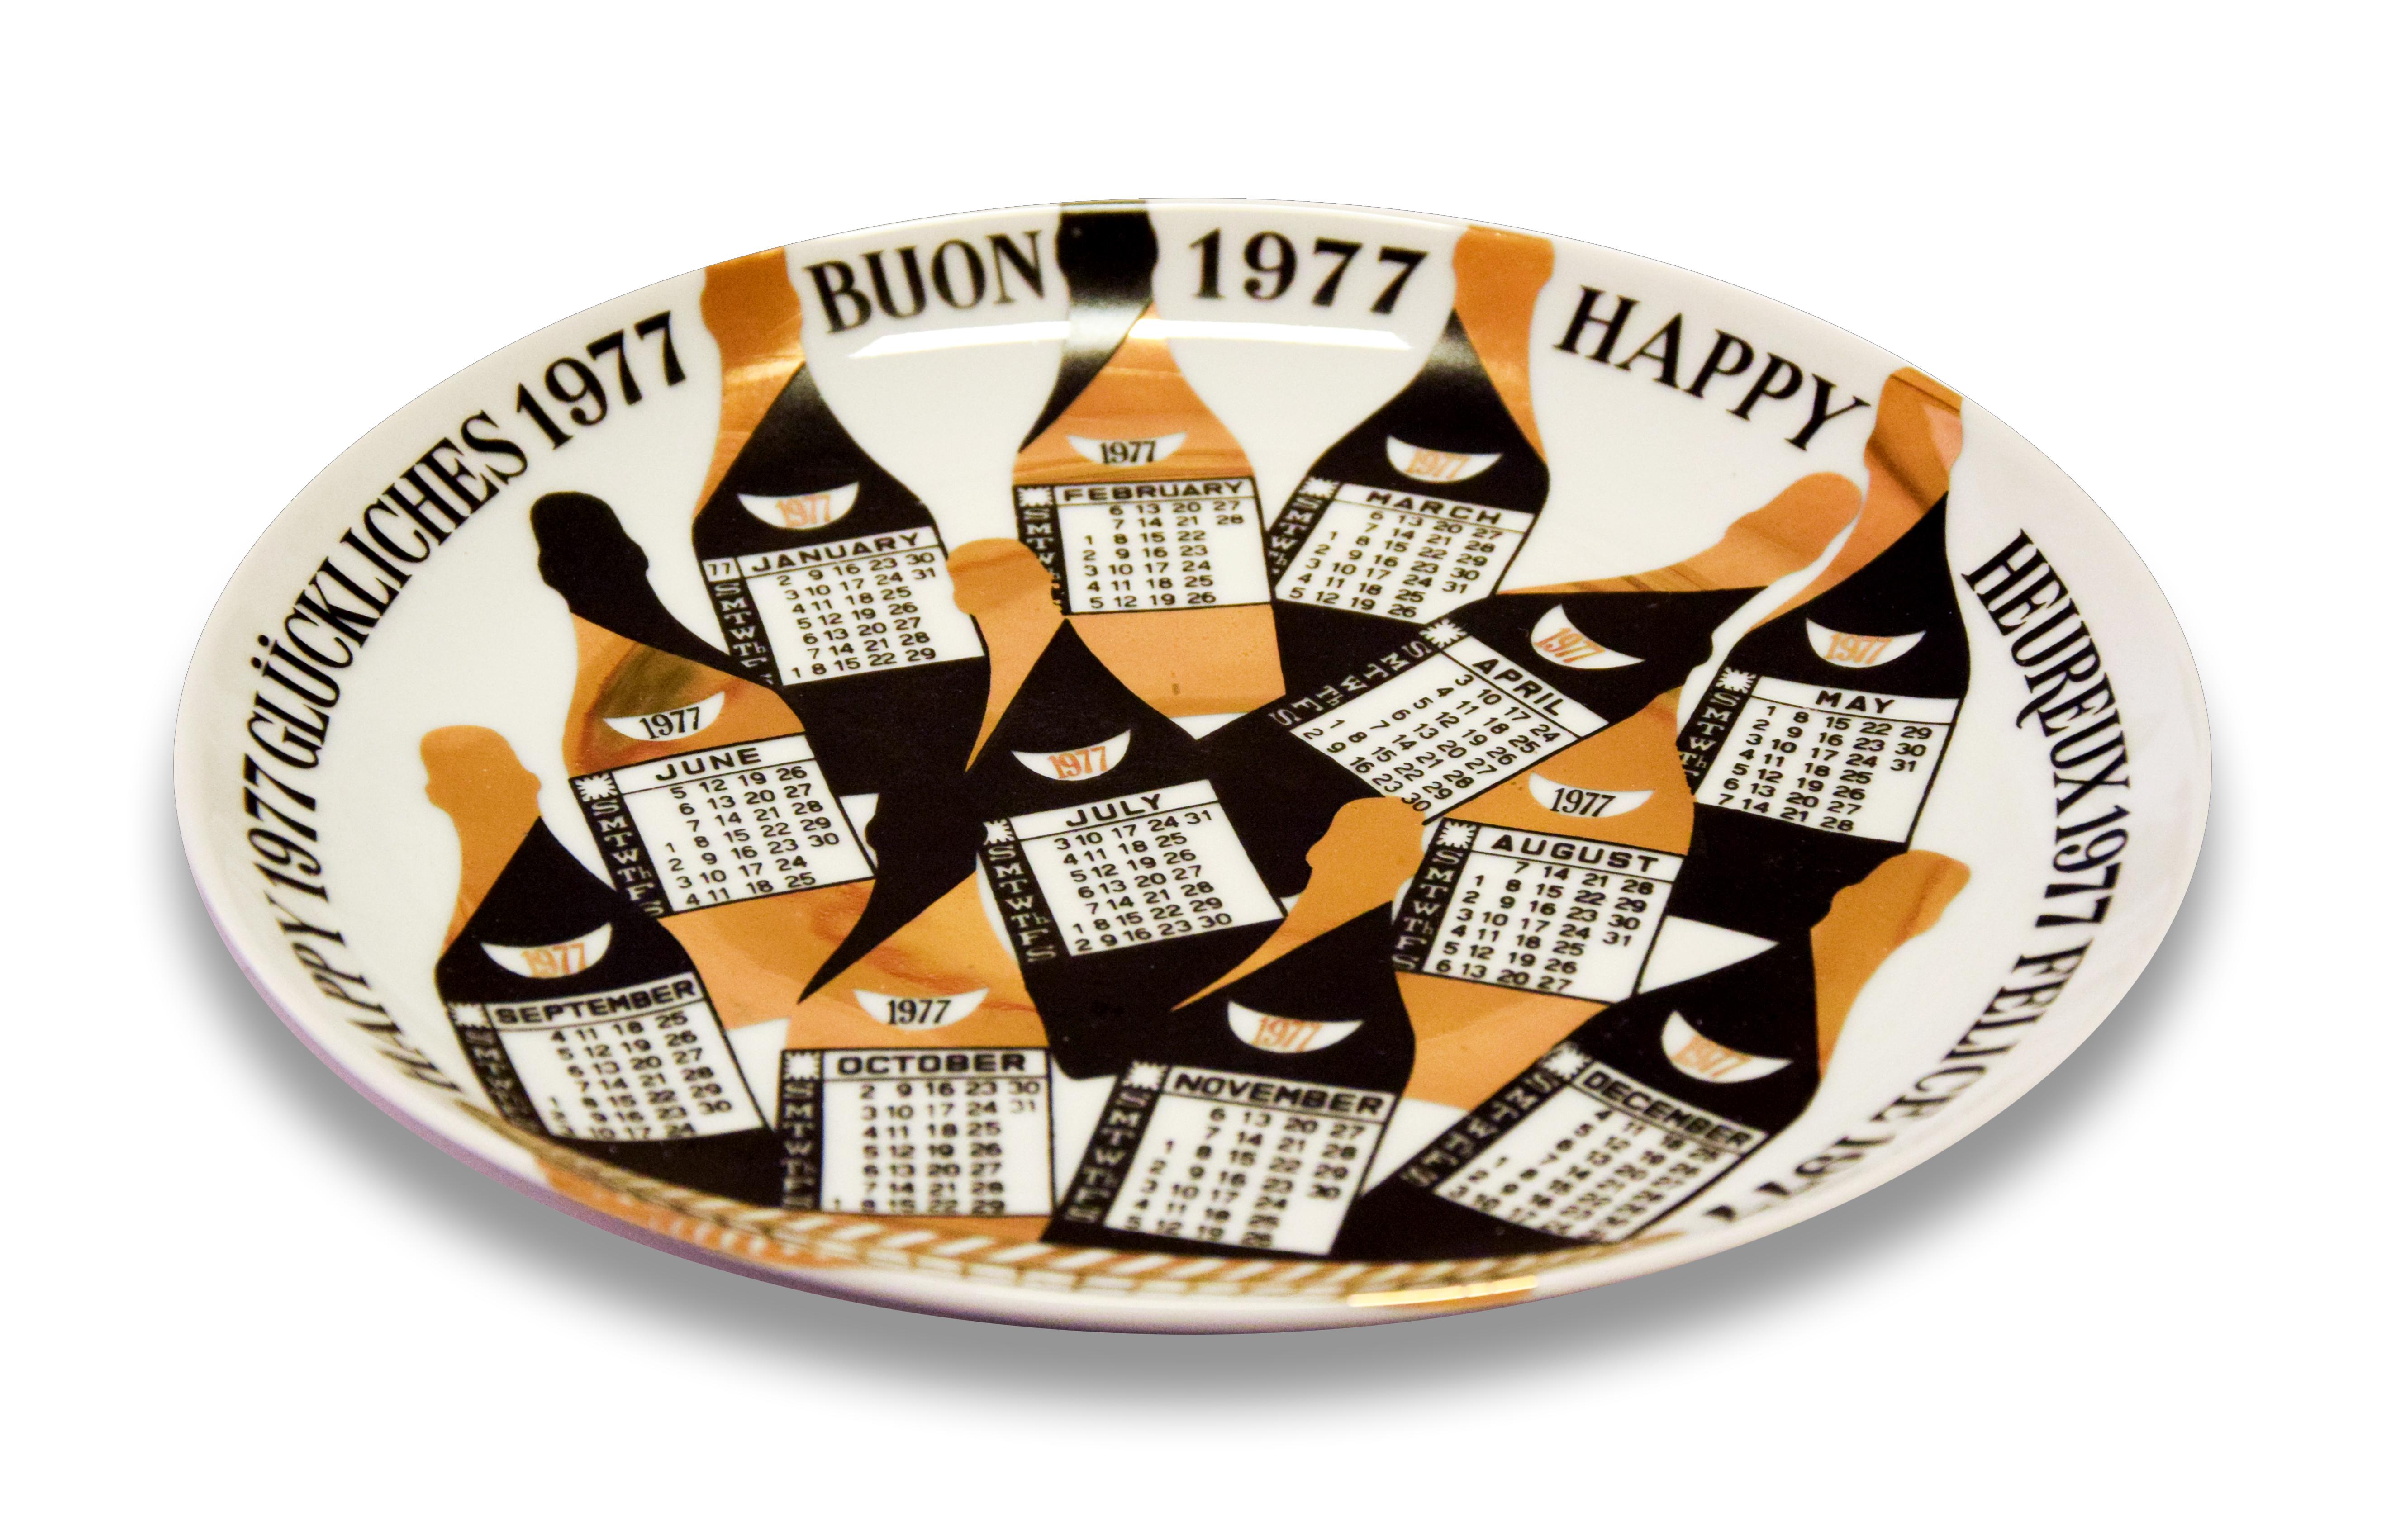 Buon 1977 Calendario is a silk-screened porcelain plate, designed by Piero Fornasetti in 1977 from the Calendario series, the Happy New Year dishes series. 

In very good conditions.

Black and white ceramic Fornasetti wall plate, illustrated